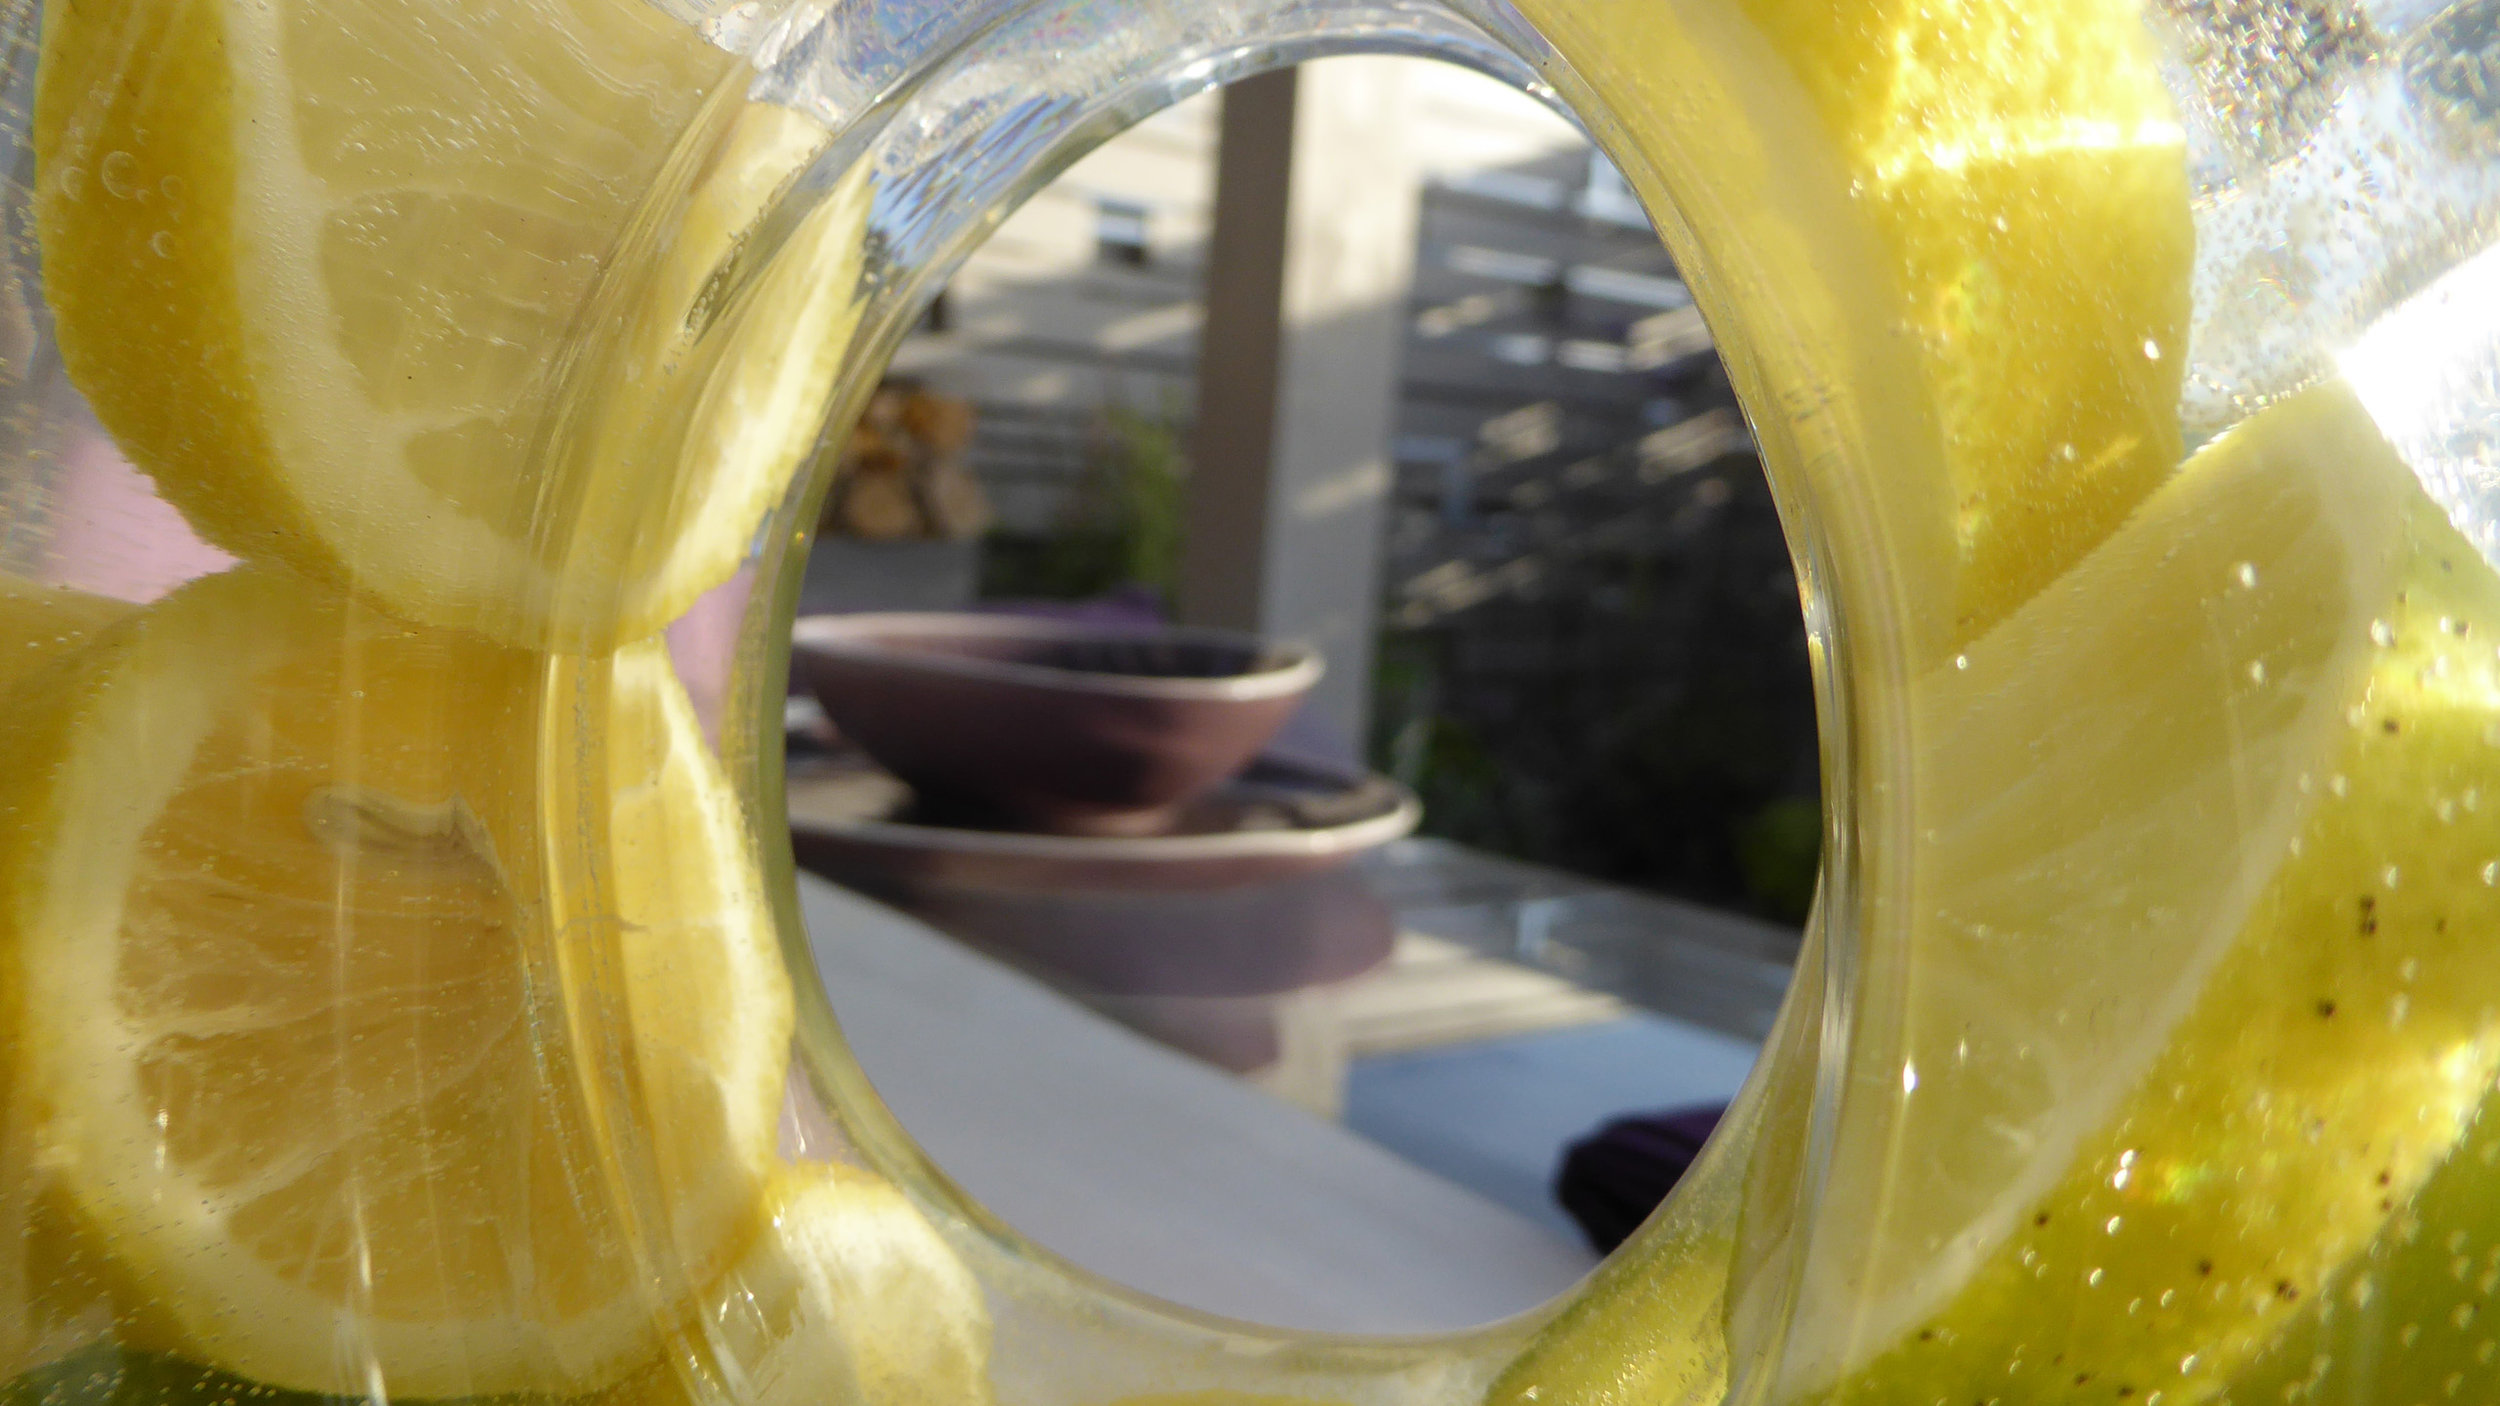 Southport Garden Design: A View Of The Olive Tree: Water Jug With Lemon Slices And Seating Area